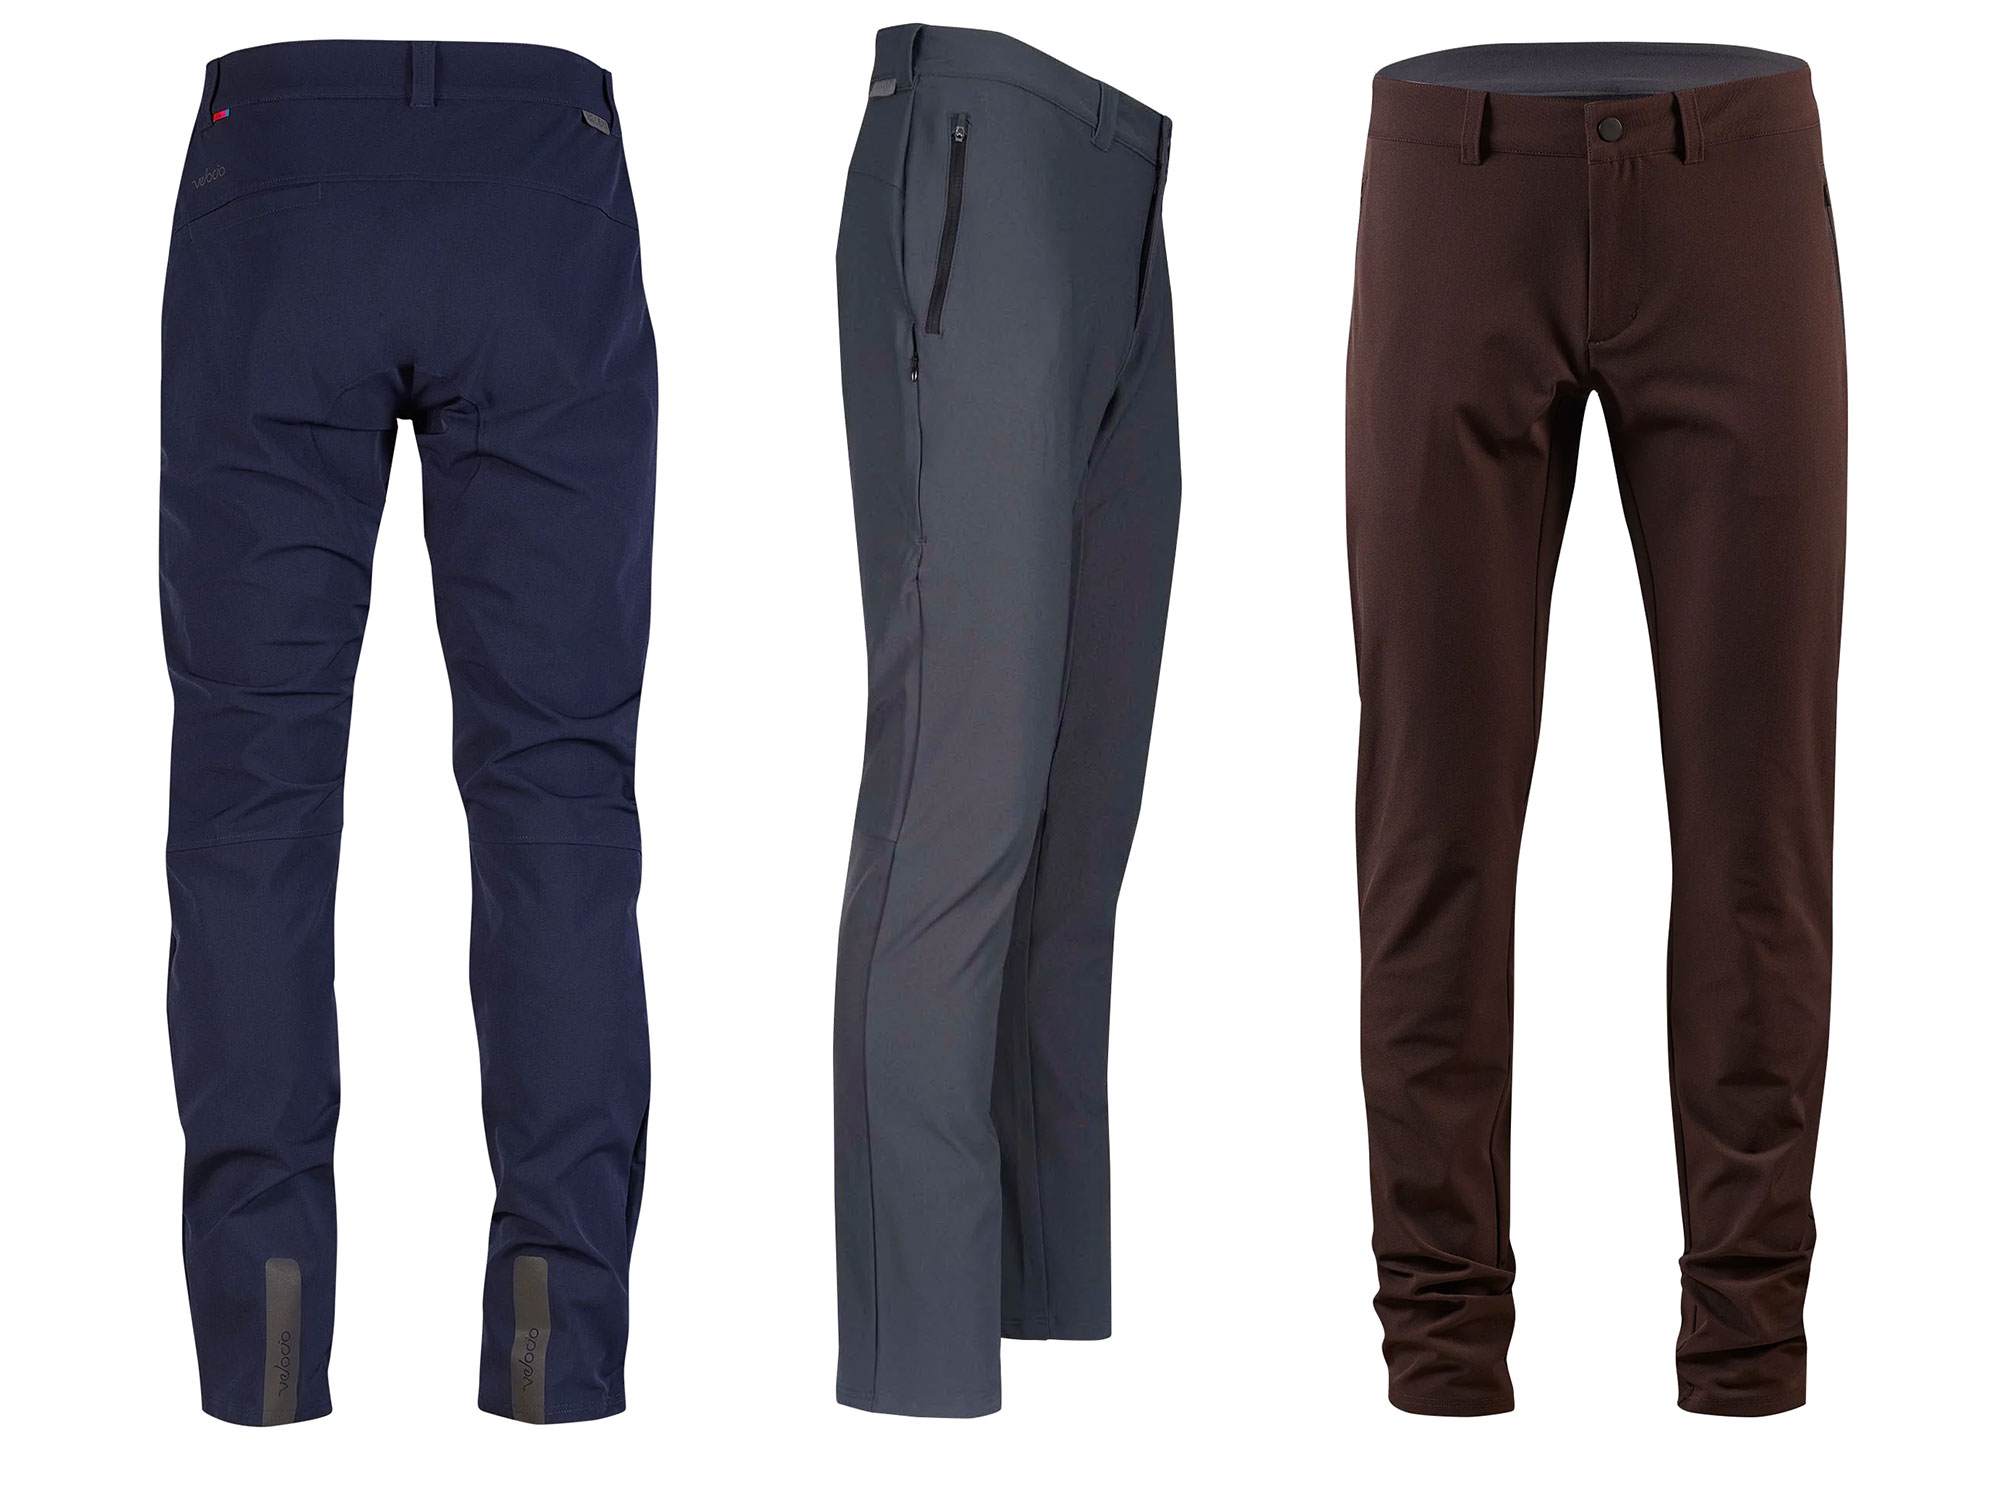 Velocio Recon casual lifestyle gear for cyclists, Men's Recon Stealth Pants